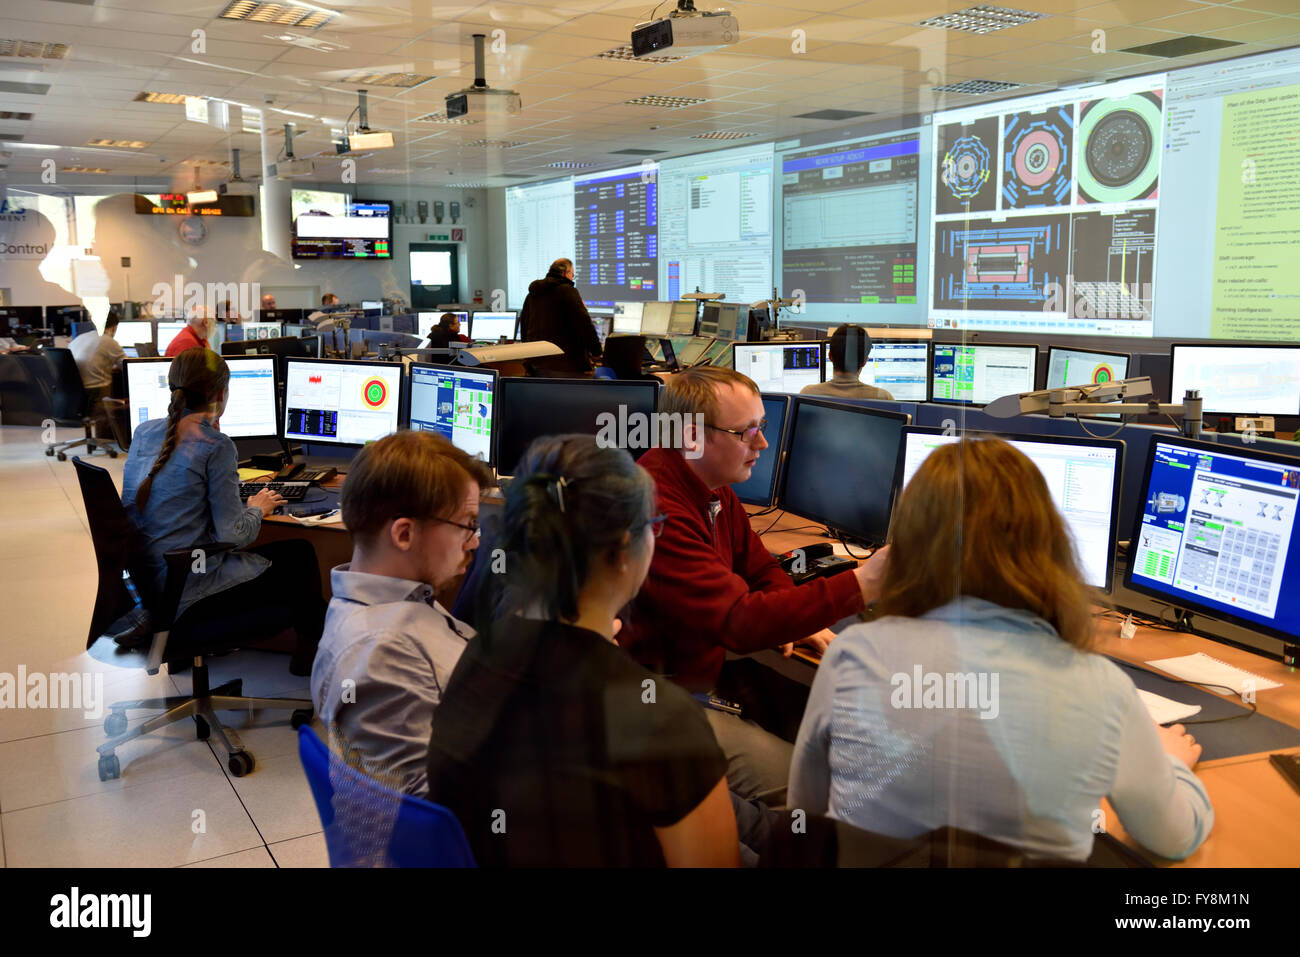 Inside the ATLAS building control room at CERN where physicists and students control detectors used to discover the Higgs boson. Stock Photo